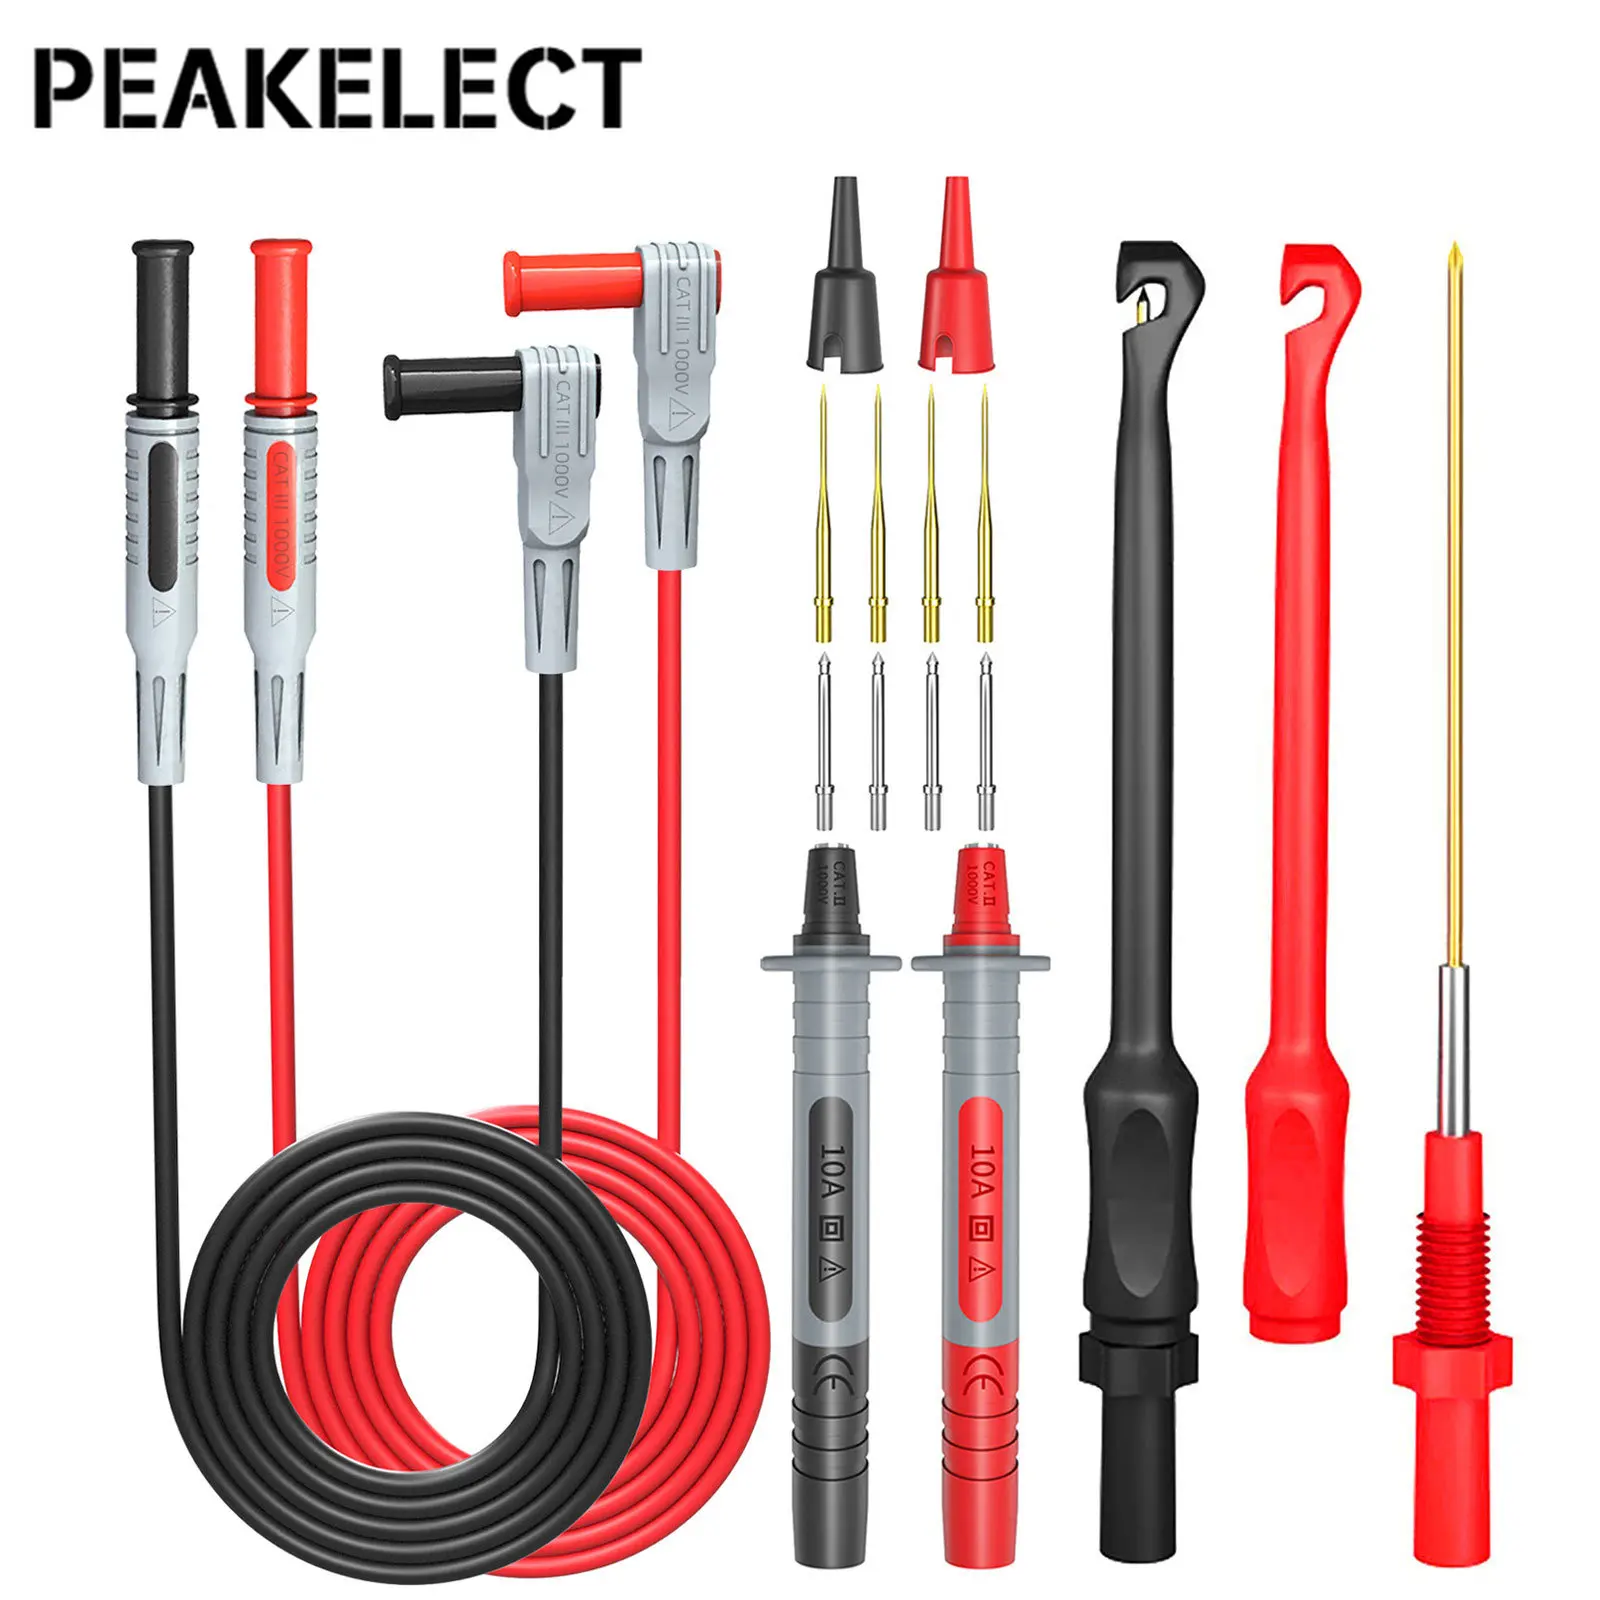 10pcs multimeter test probe measuring device clamp copper test lead test probes plug for clamp meters instrument accessories Peakelect P1033B Multimeter Test Probes Leads Kit with Wire Piercing Puncture 4mm Banana Plug Test Leads Test Probes